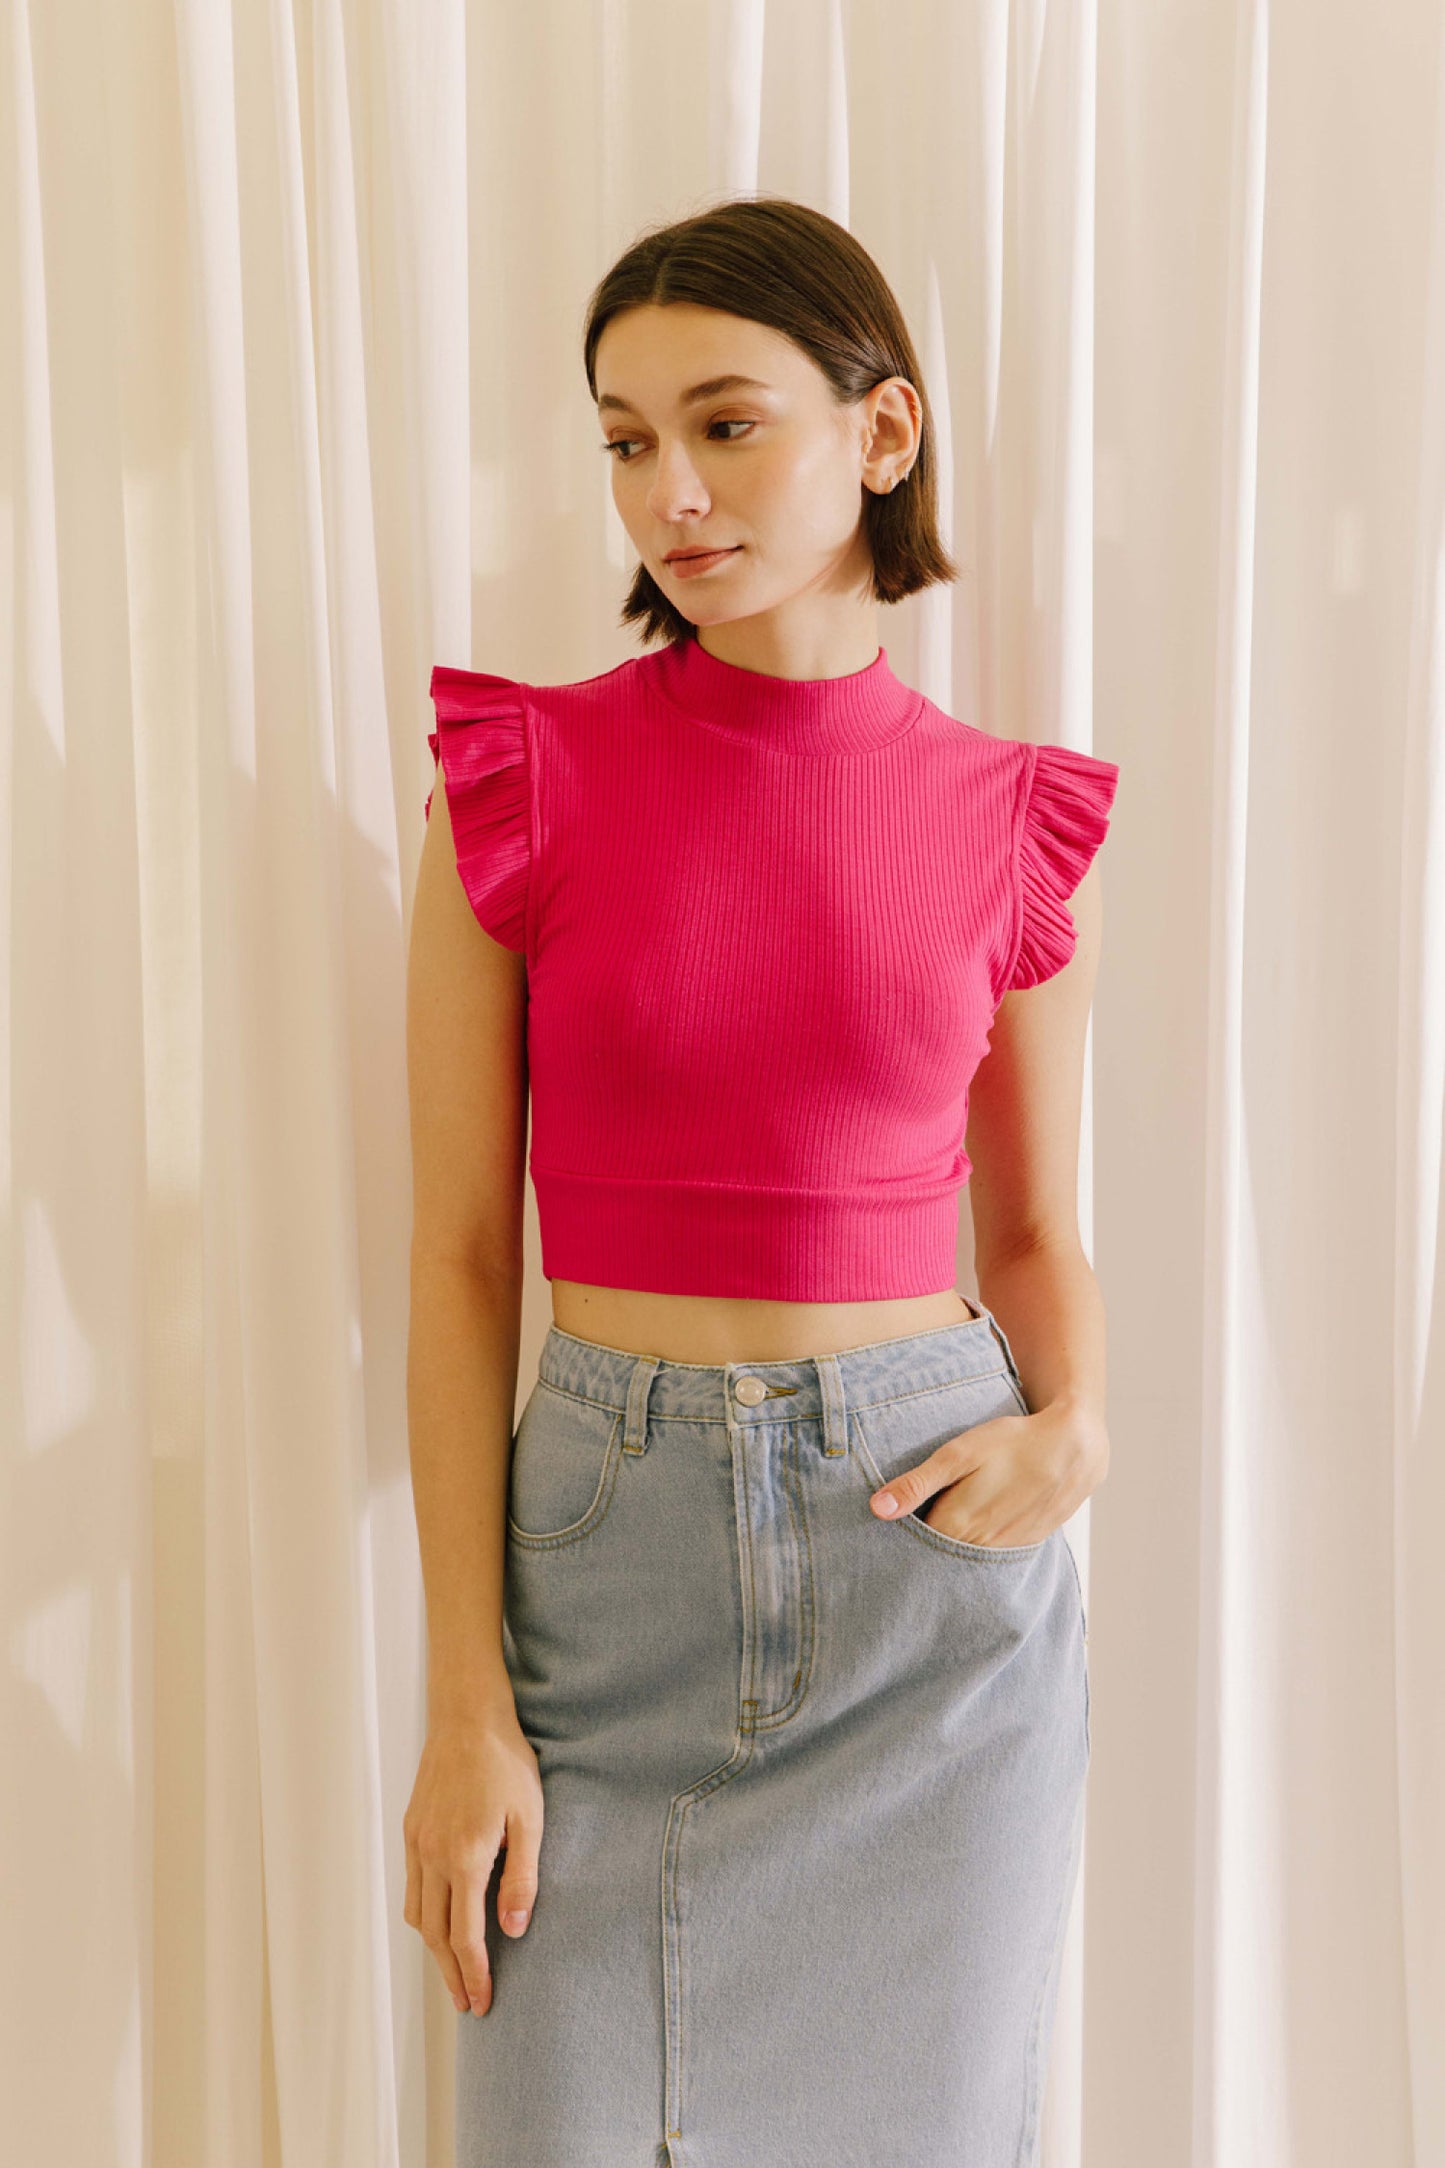 Ribbed knit mock neck crop top in fuchsia featuring ruffle sleeves.  Close front view.